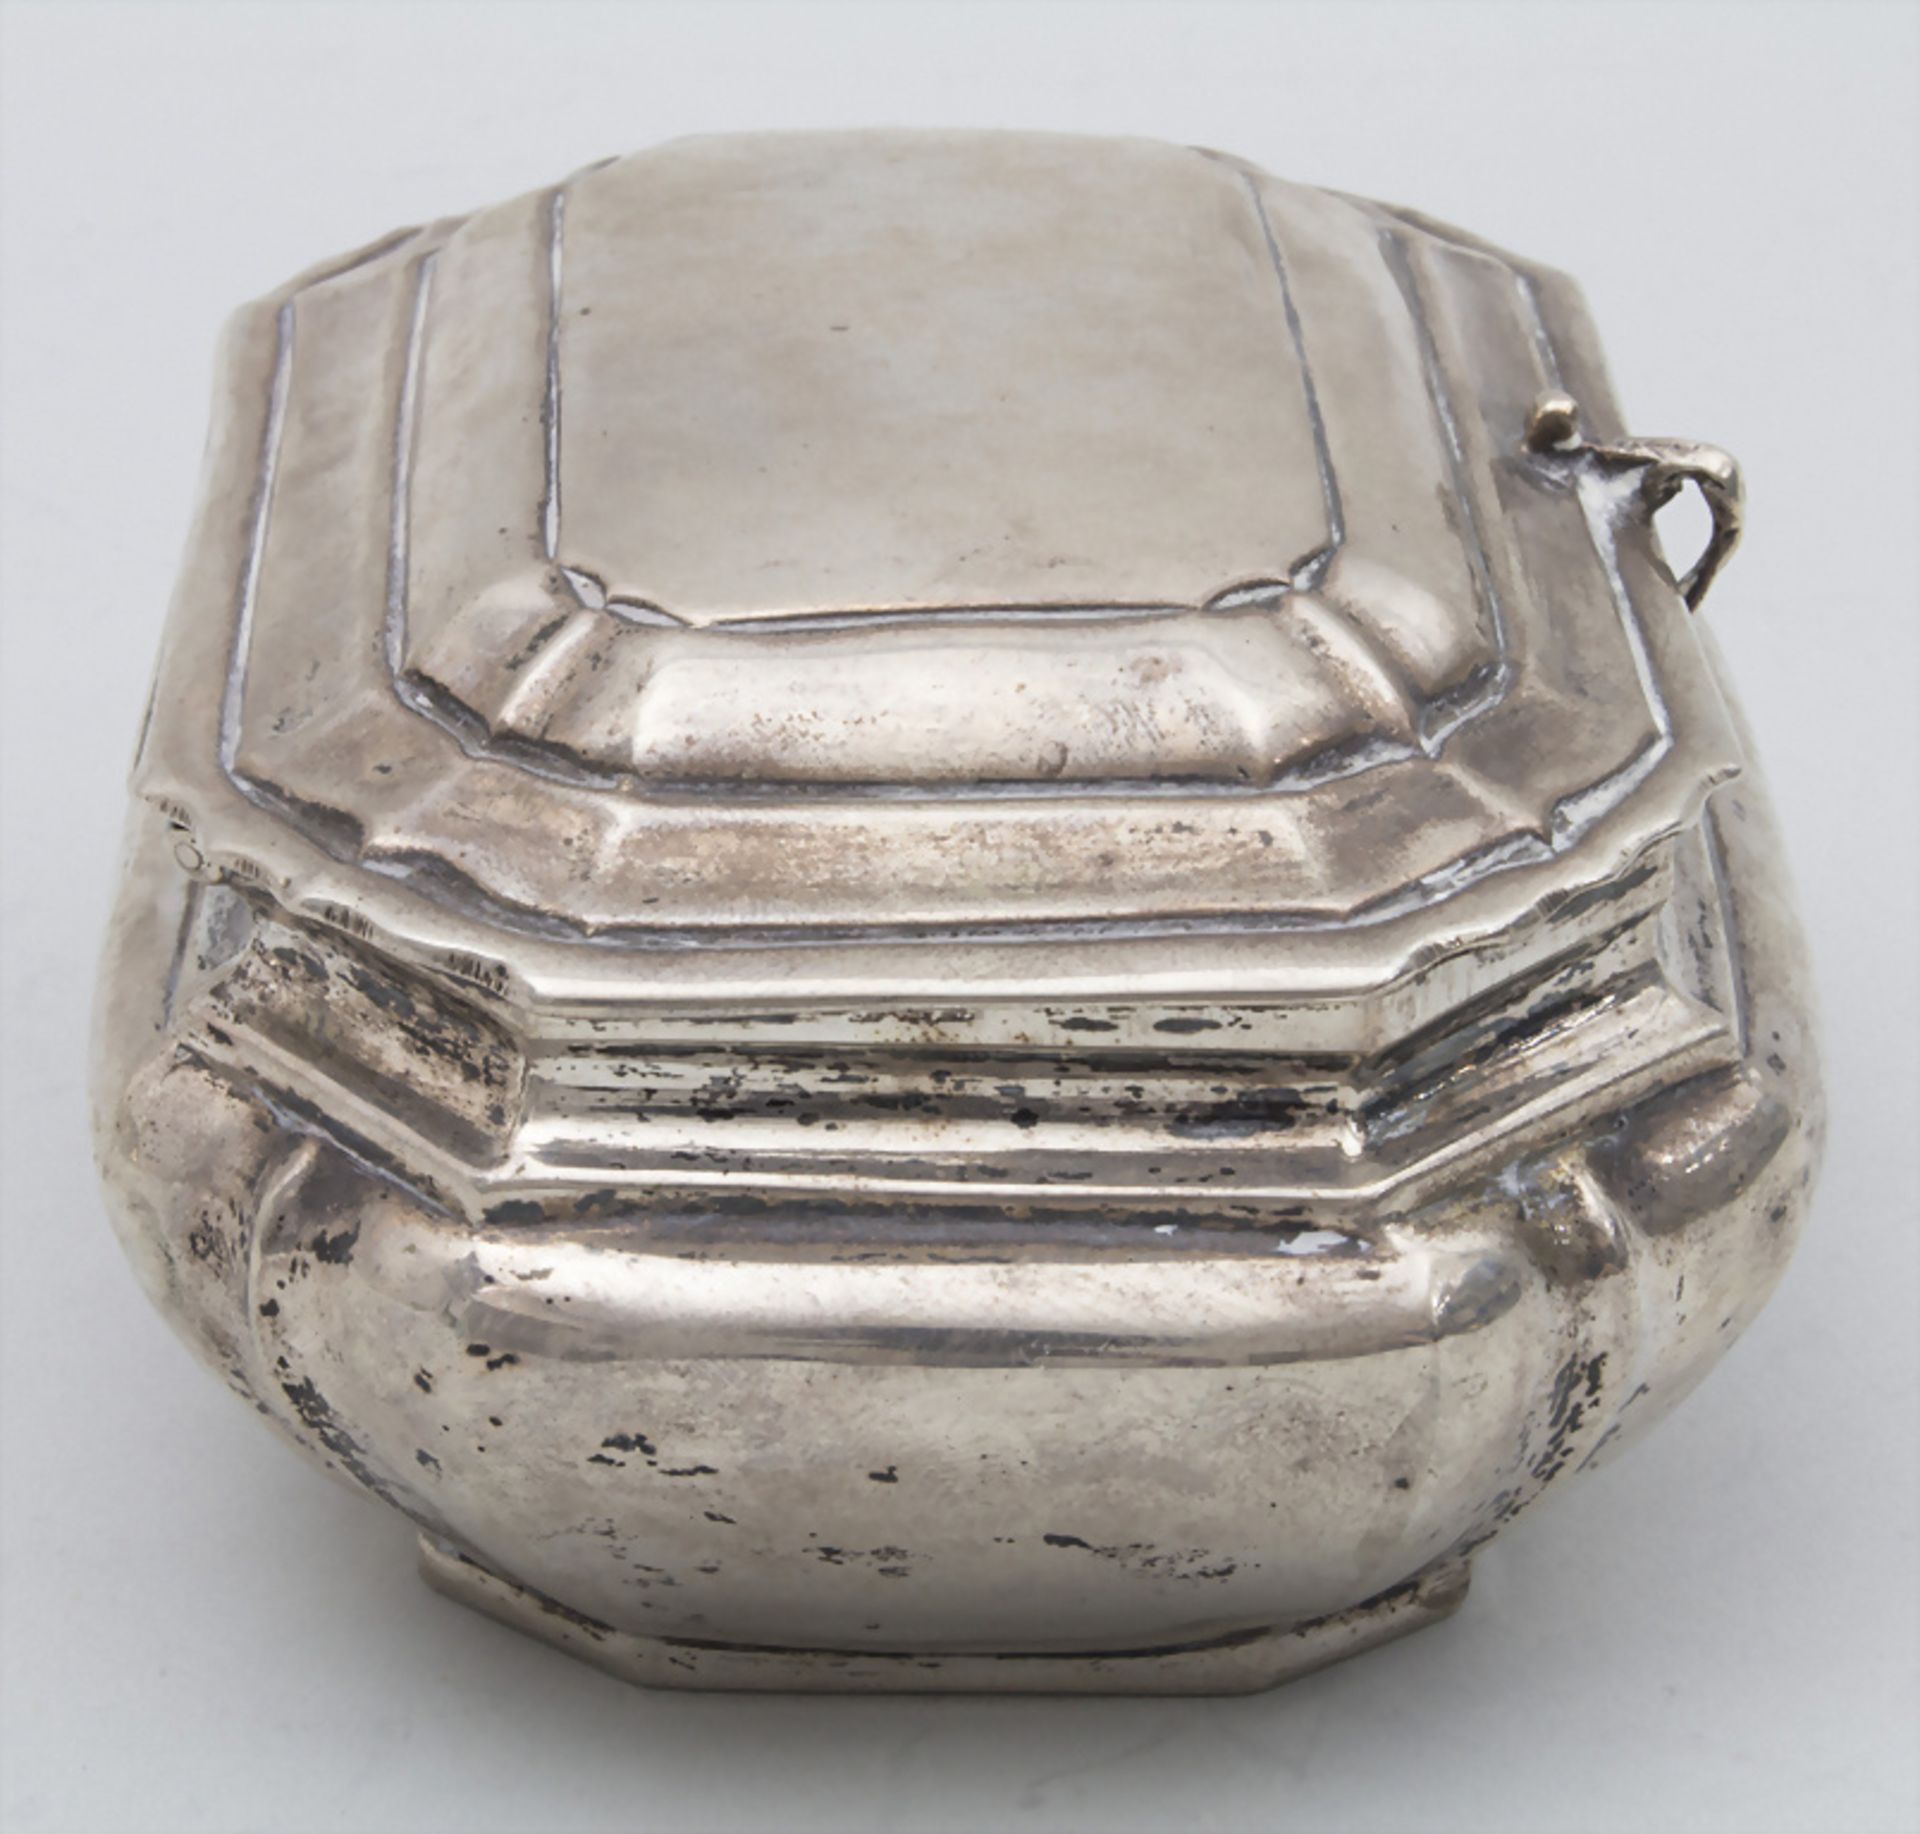 Barock Dose / A baroque silver box, Stephan Christian Wolter, Olawa / Ohlau in Schlesien, um 1725 - Image 3 of 8